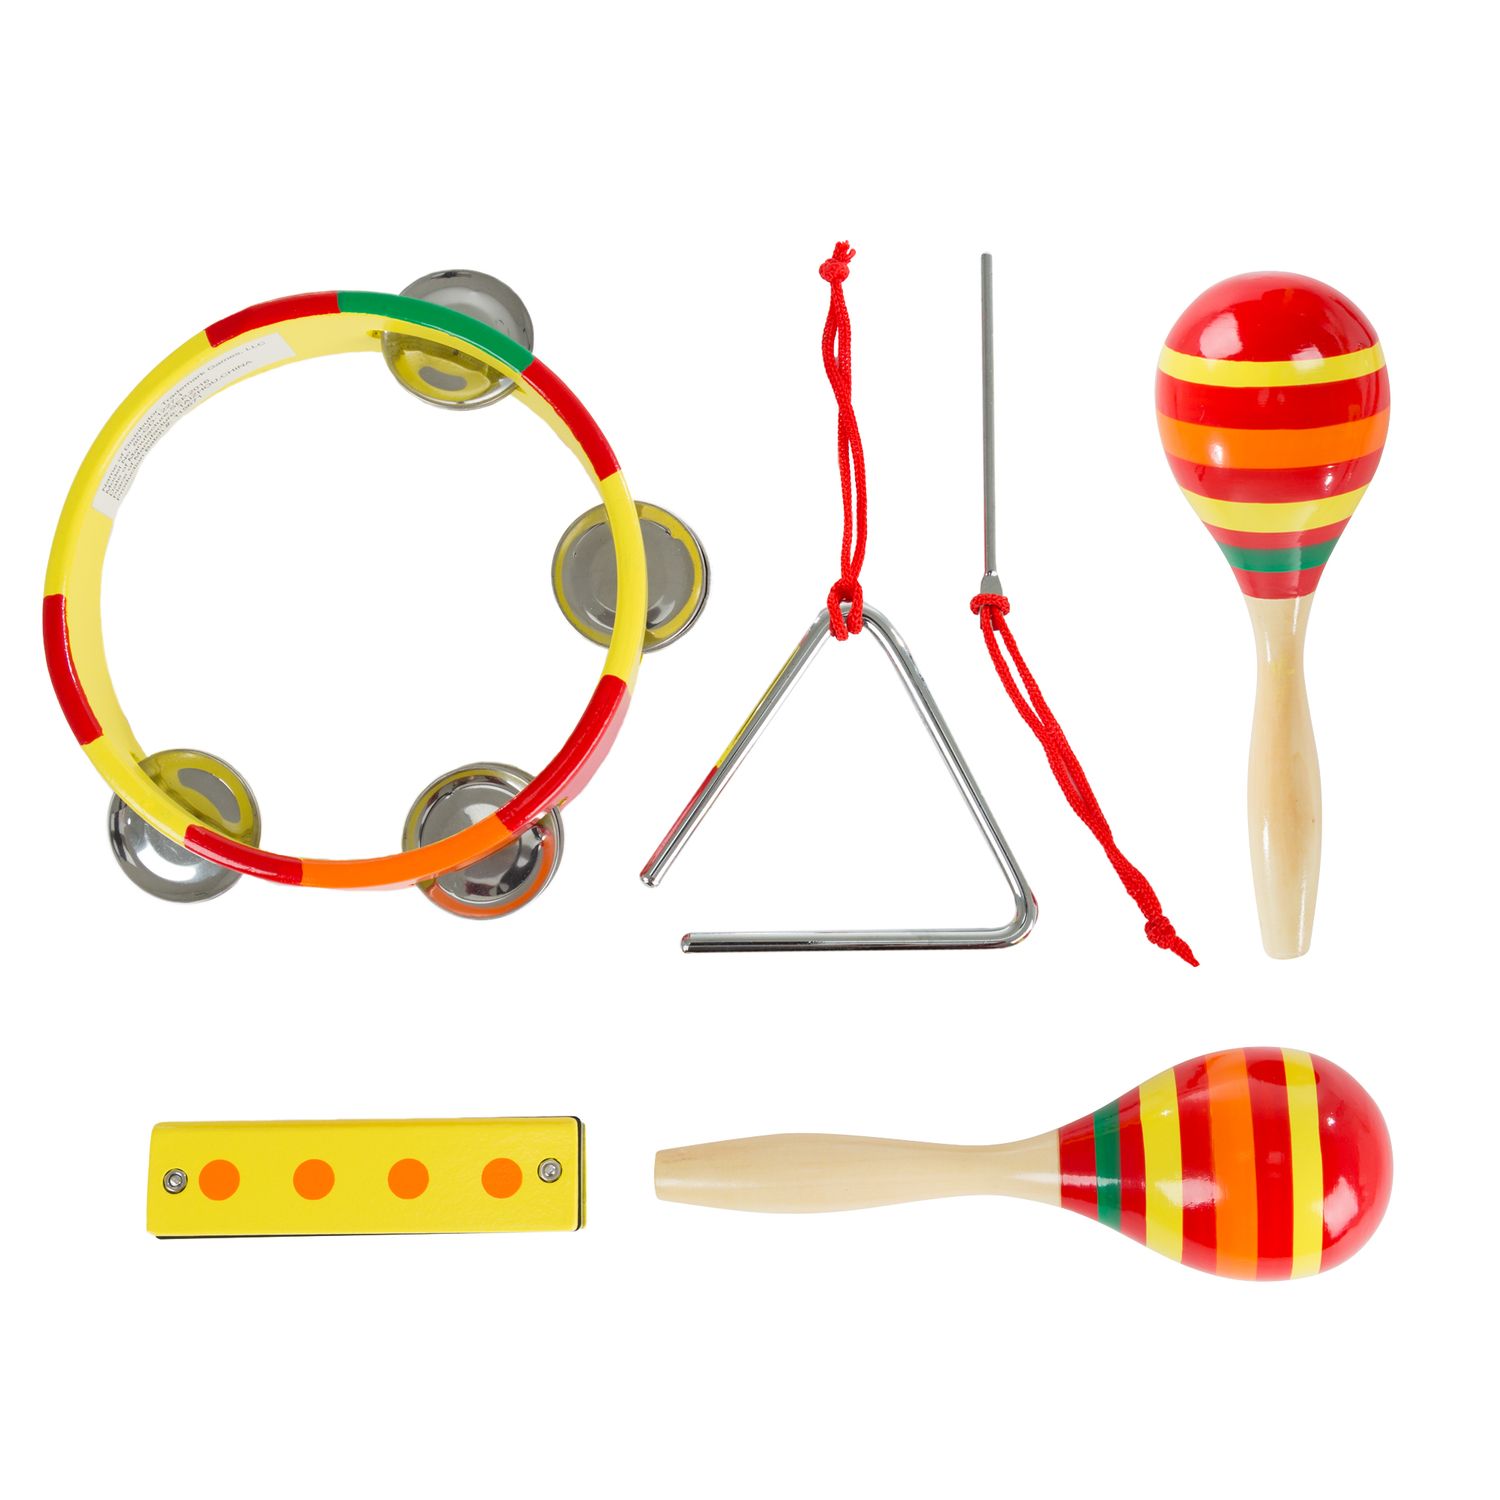 Image for Hey! Play! Kids Percussion Musical Instruments Toy Set at Kohl's.